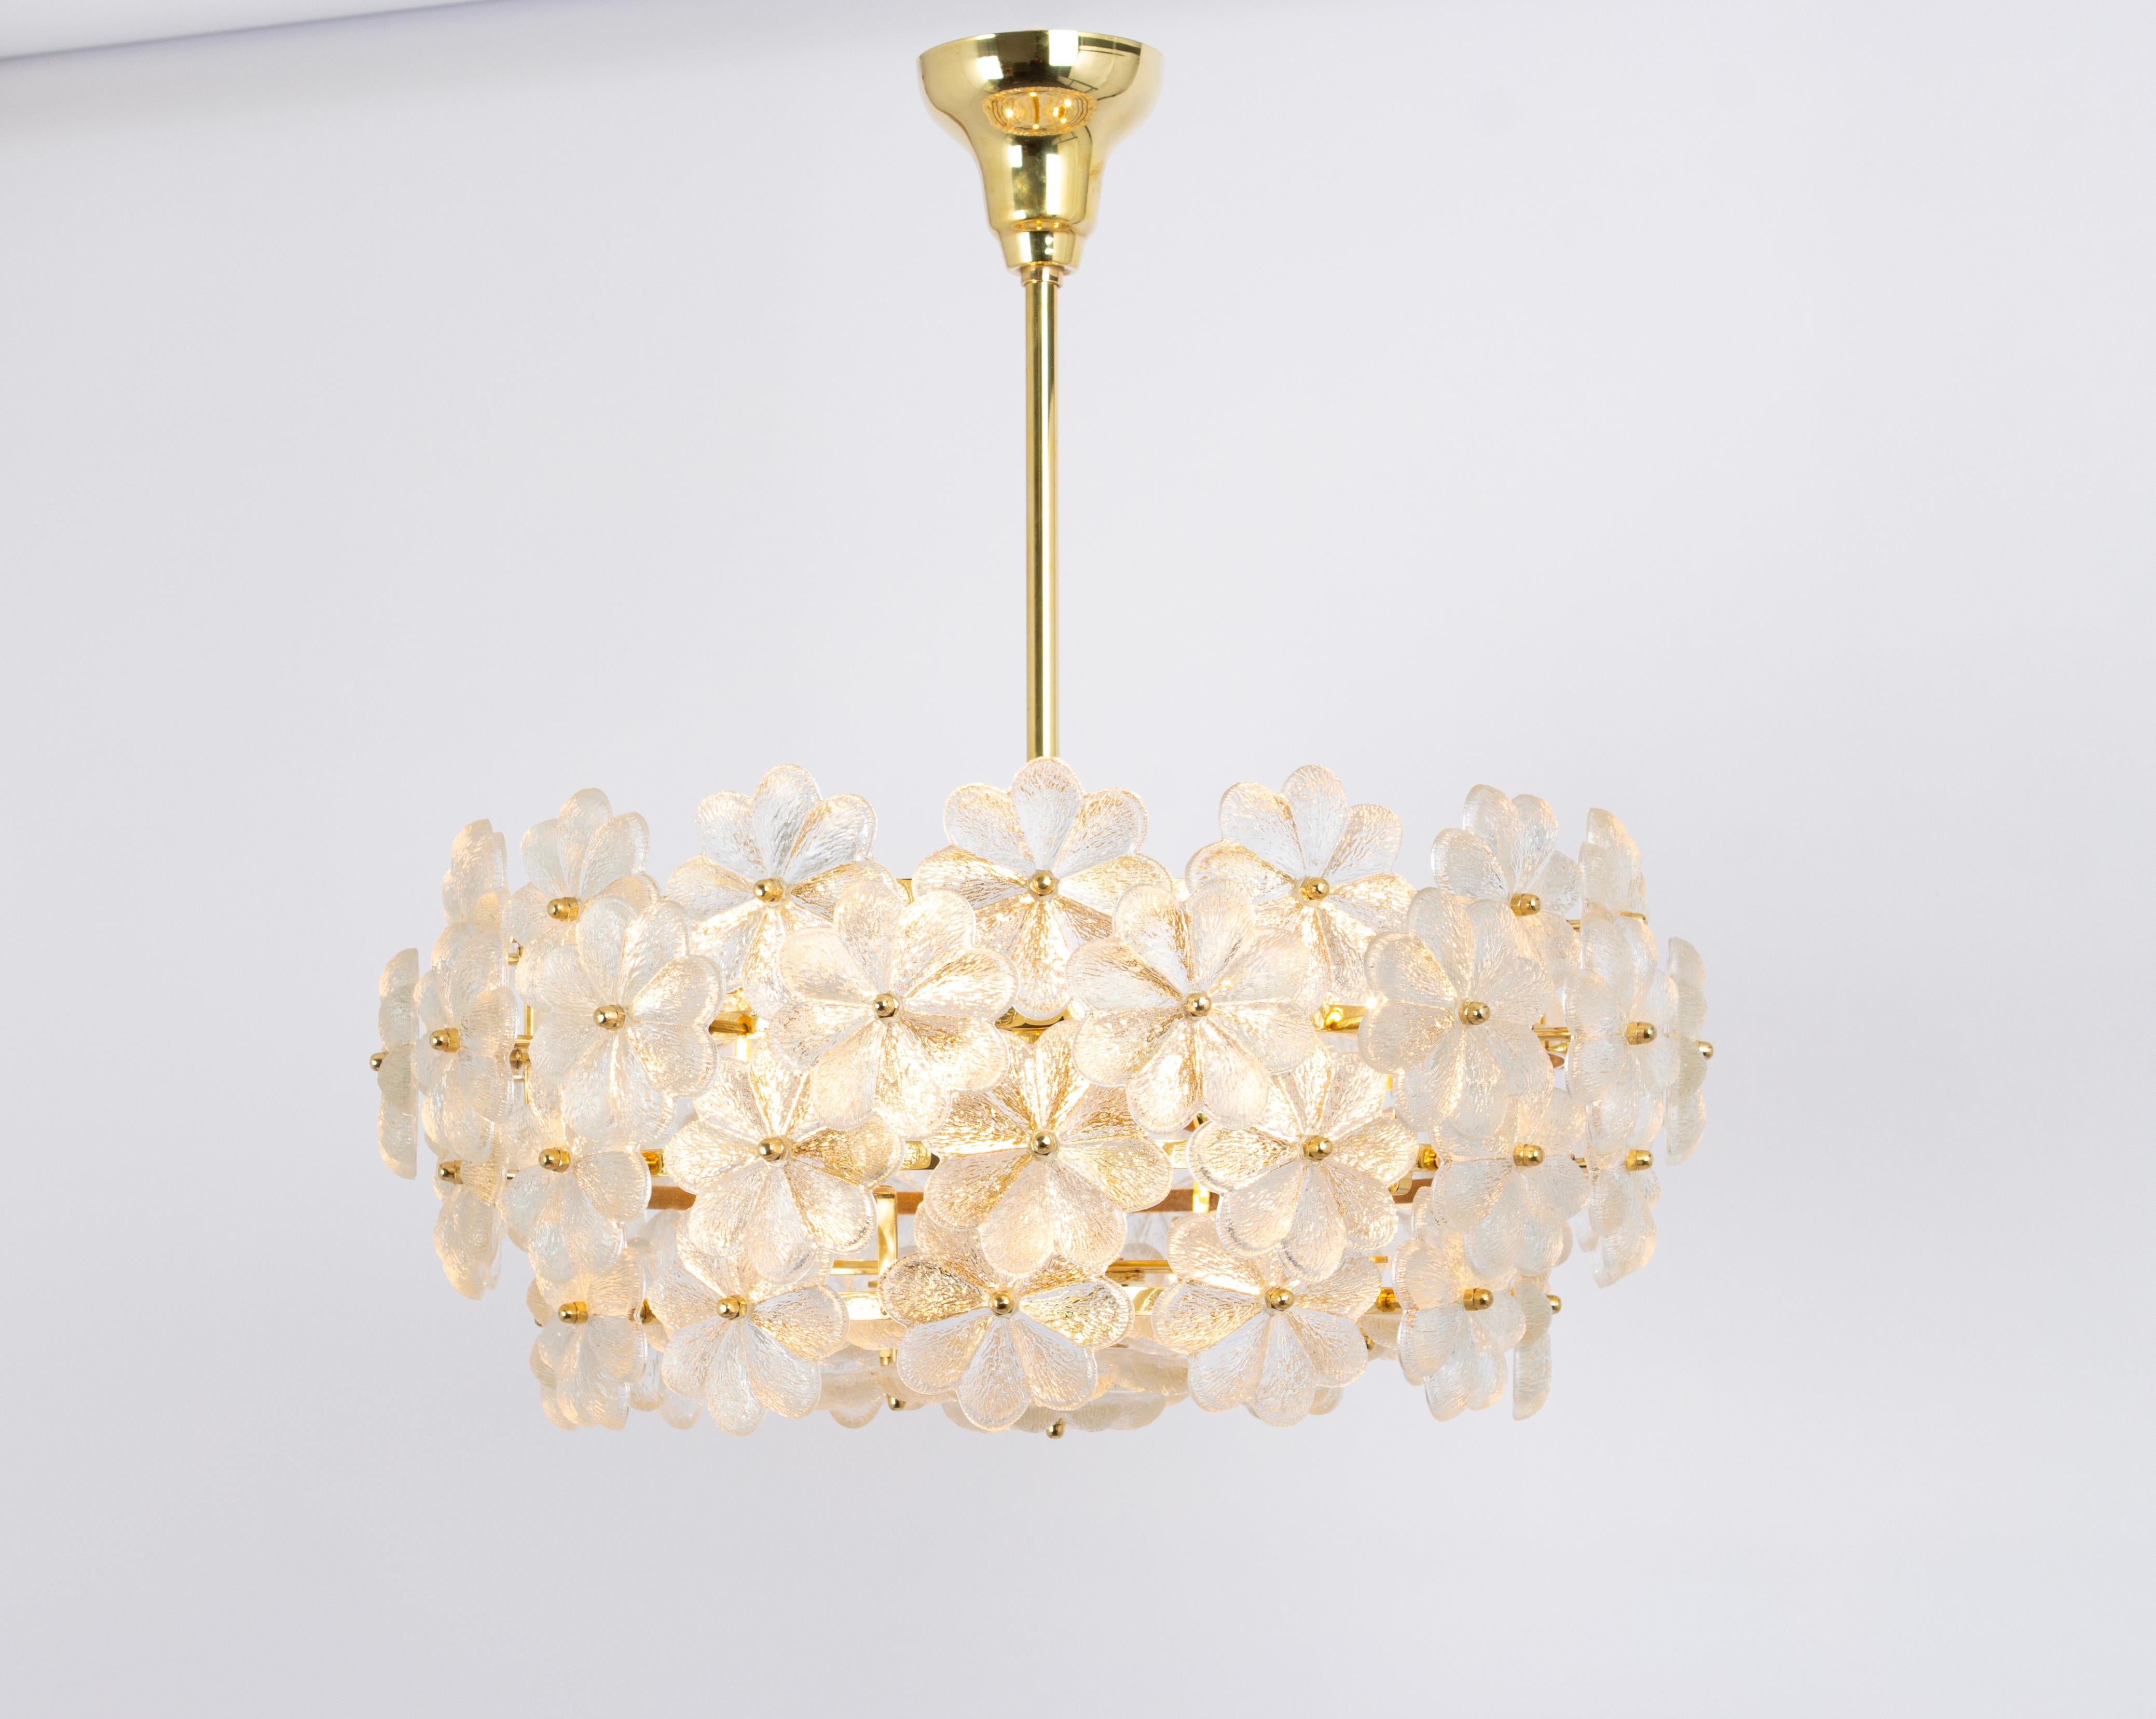 1 of 2 Stunning Murano Glass Chandelier by Ernst Palme, Germany, 1970s For Sale 1